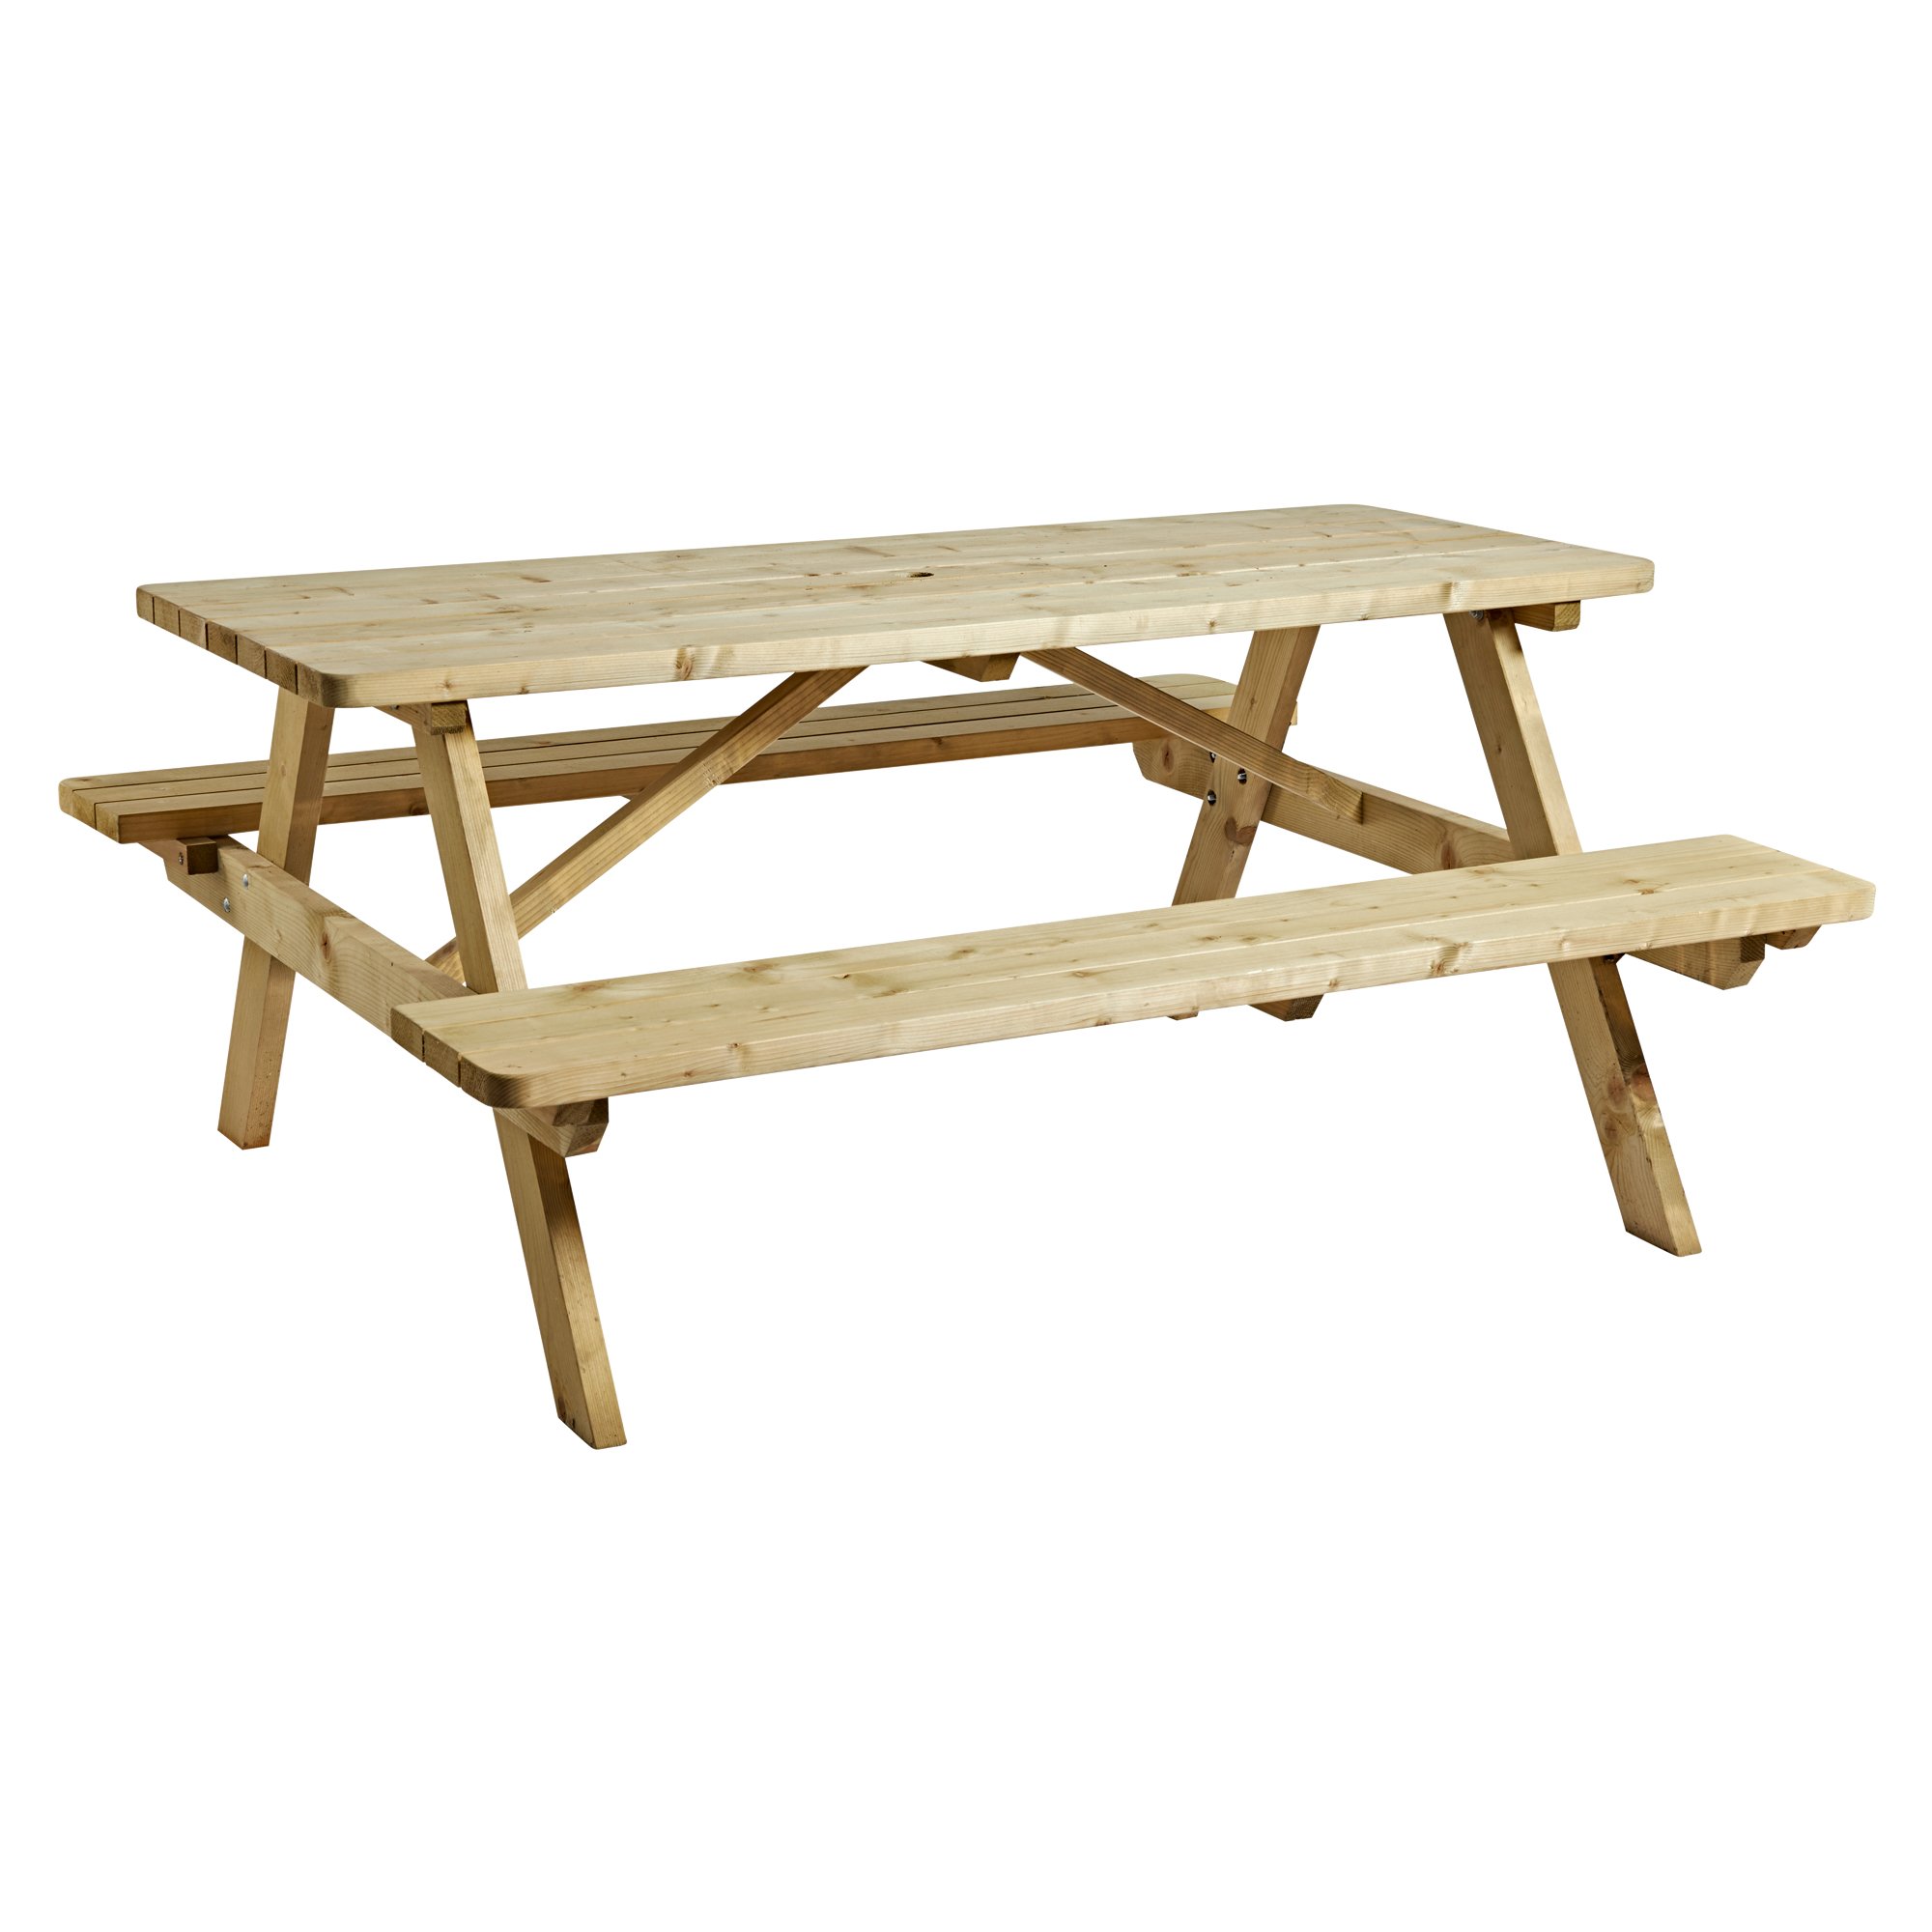 WOODEN 8 SEATER PICNIC BENCH